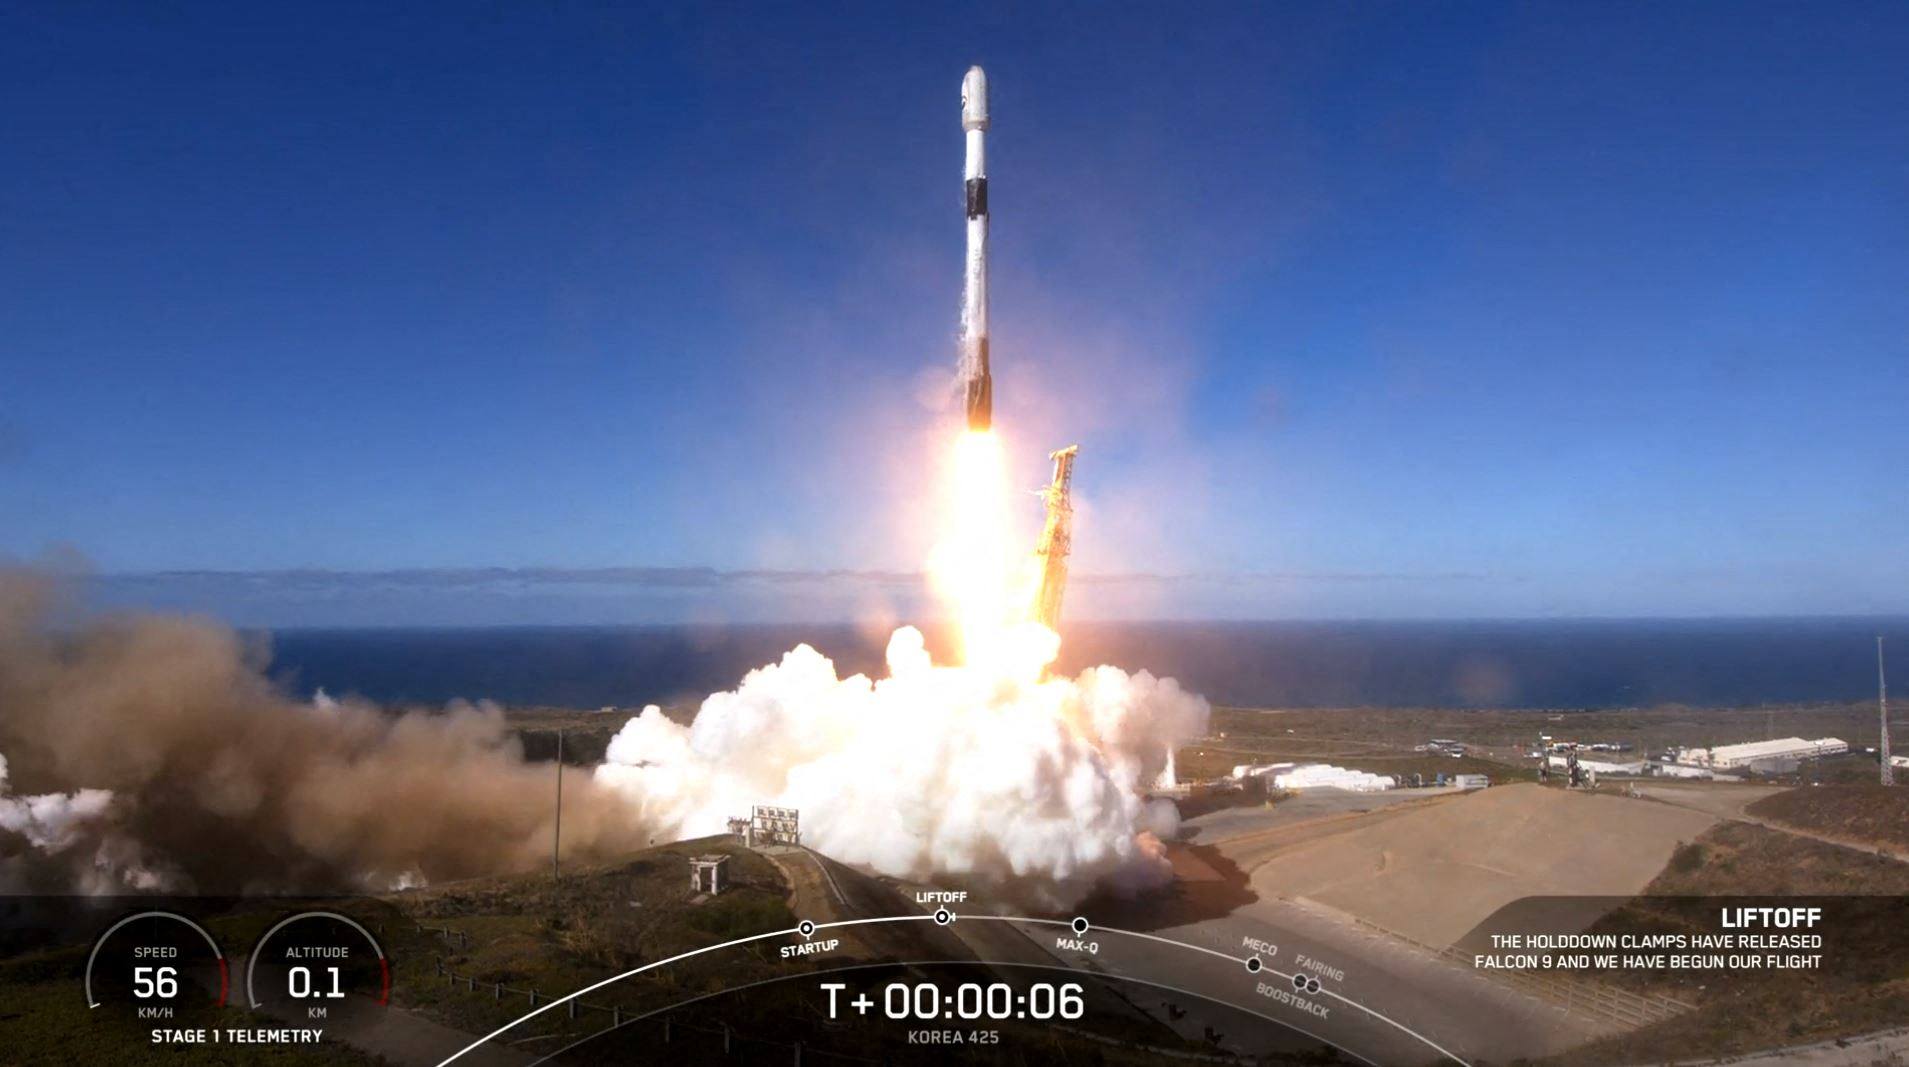 This screen grab taken from a SpaceX video shows the Falcon 9 launch of the Korea 425 Mission at Vandenberg Air Force Base in California on December 1. The SpaceX rocket launched South Korea’s first military spy satellite, intensifying a space race on the peninsula after Pyongyang launched its own first military eye in the sky. Photo: SpaceX / AFP